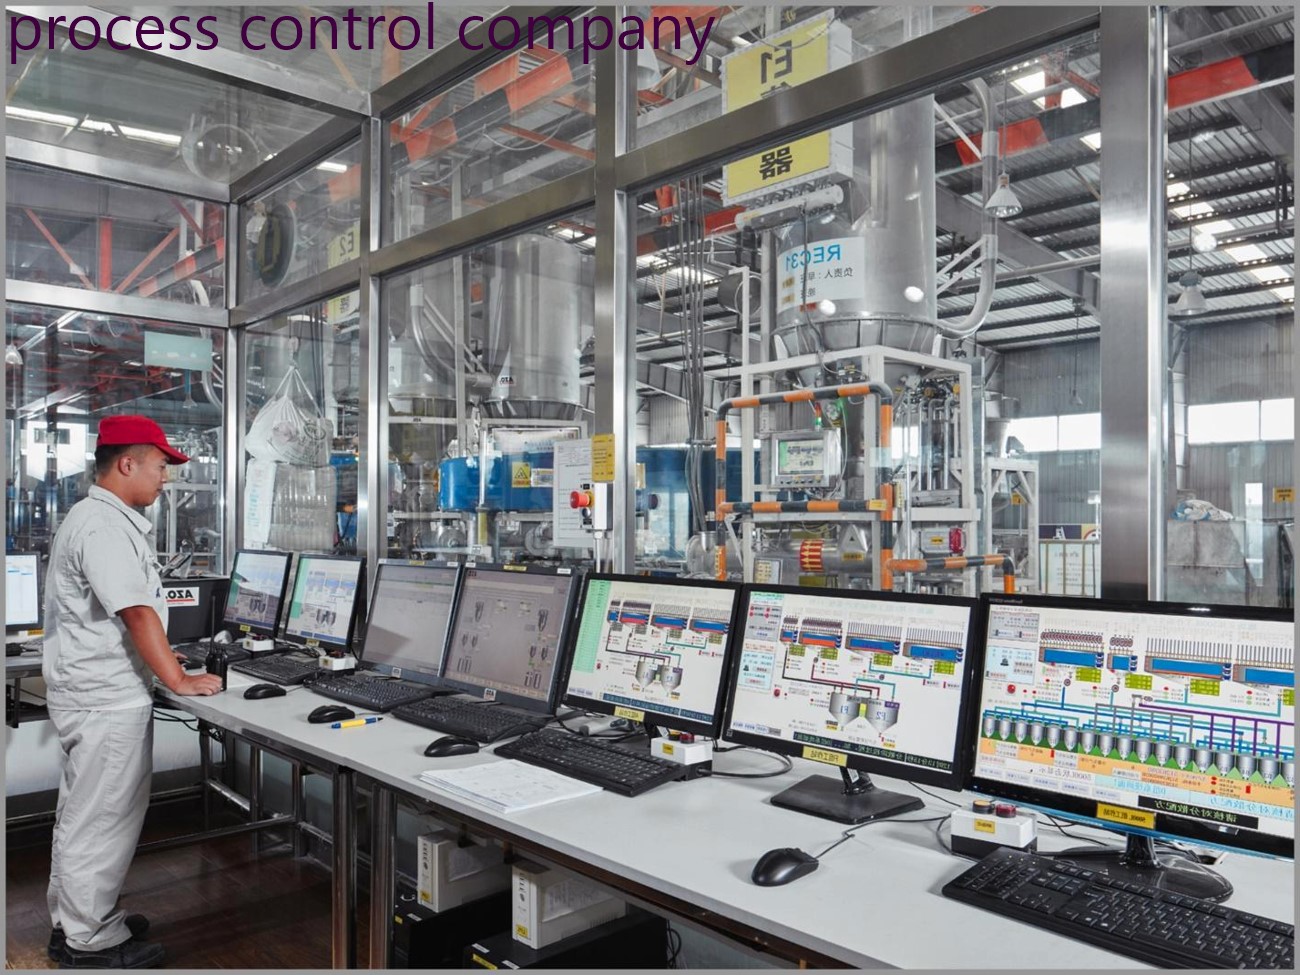 What Is A Process Control Company